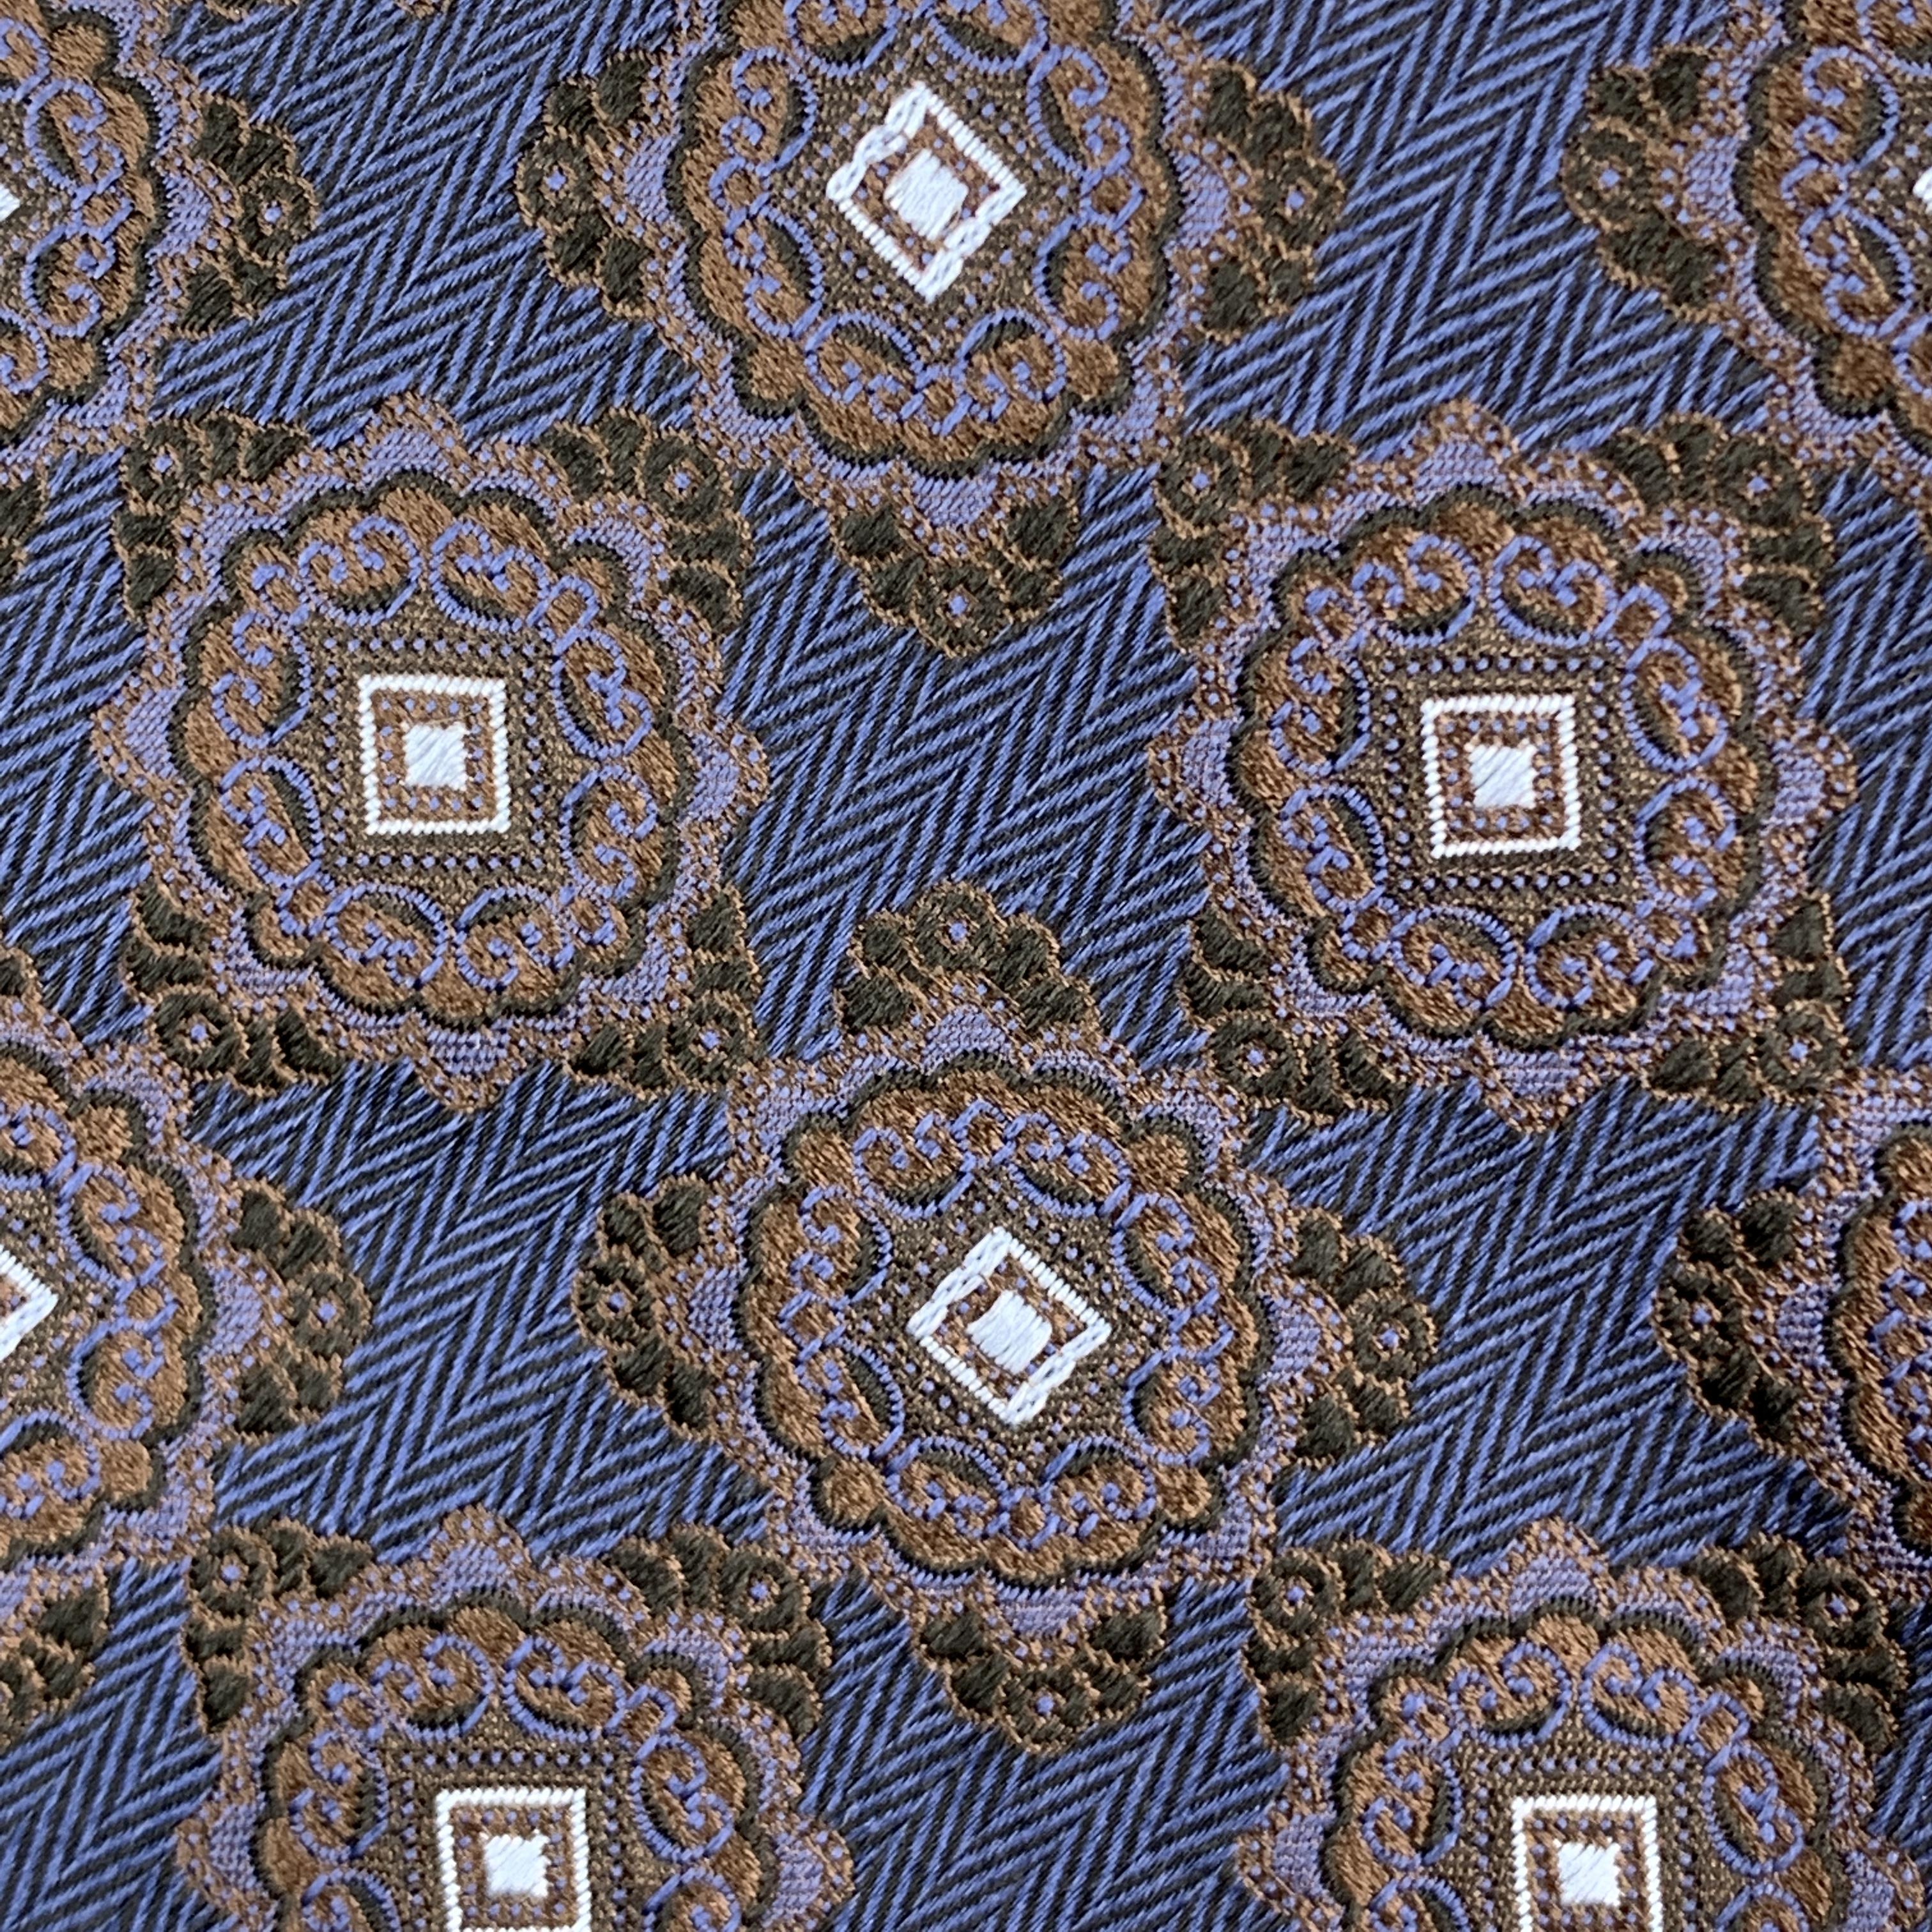 ERMENEGILDO ZEGNA necktie comes in navy silk with all over brown damask print. Made in Italy.

New with Tags.

Width: 3.5 in.